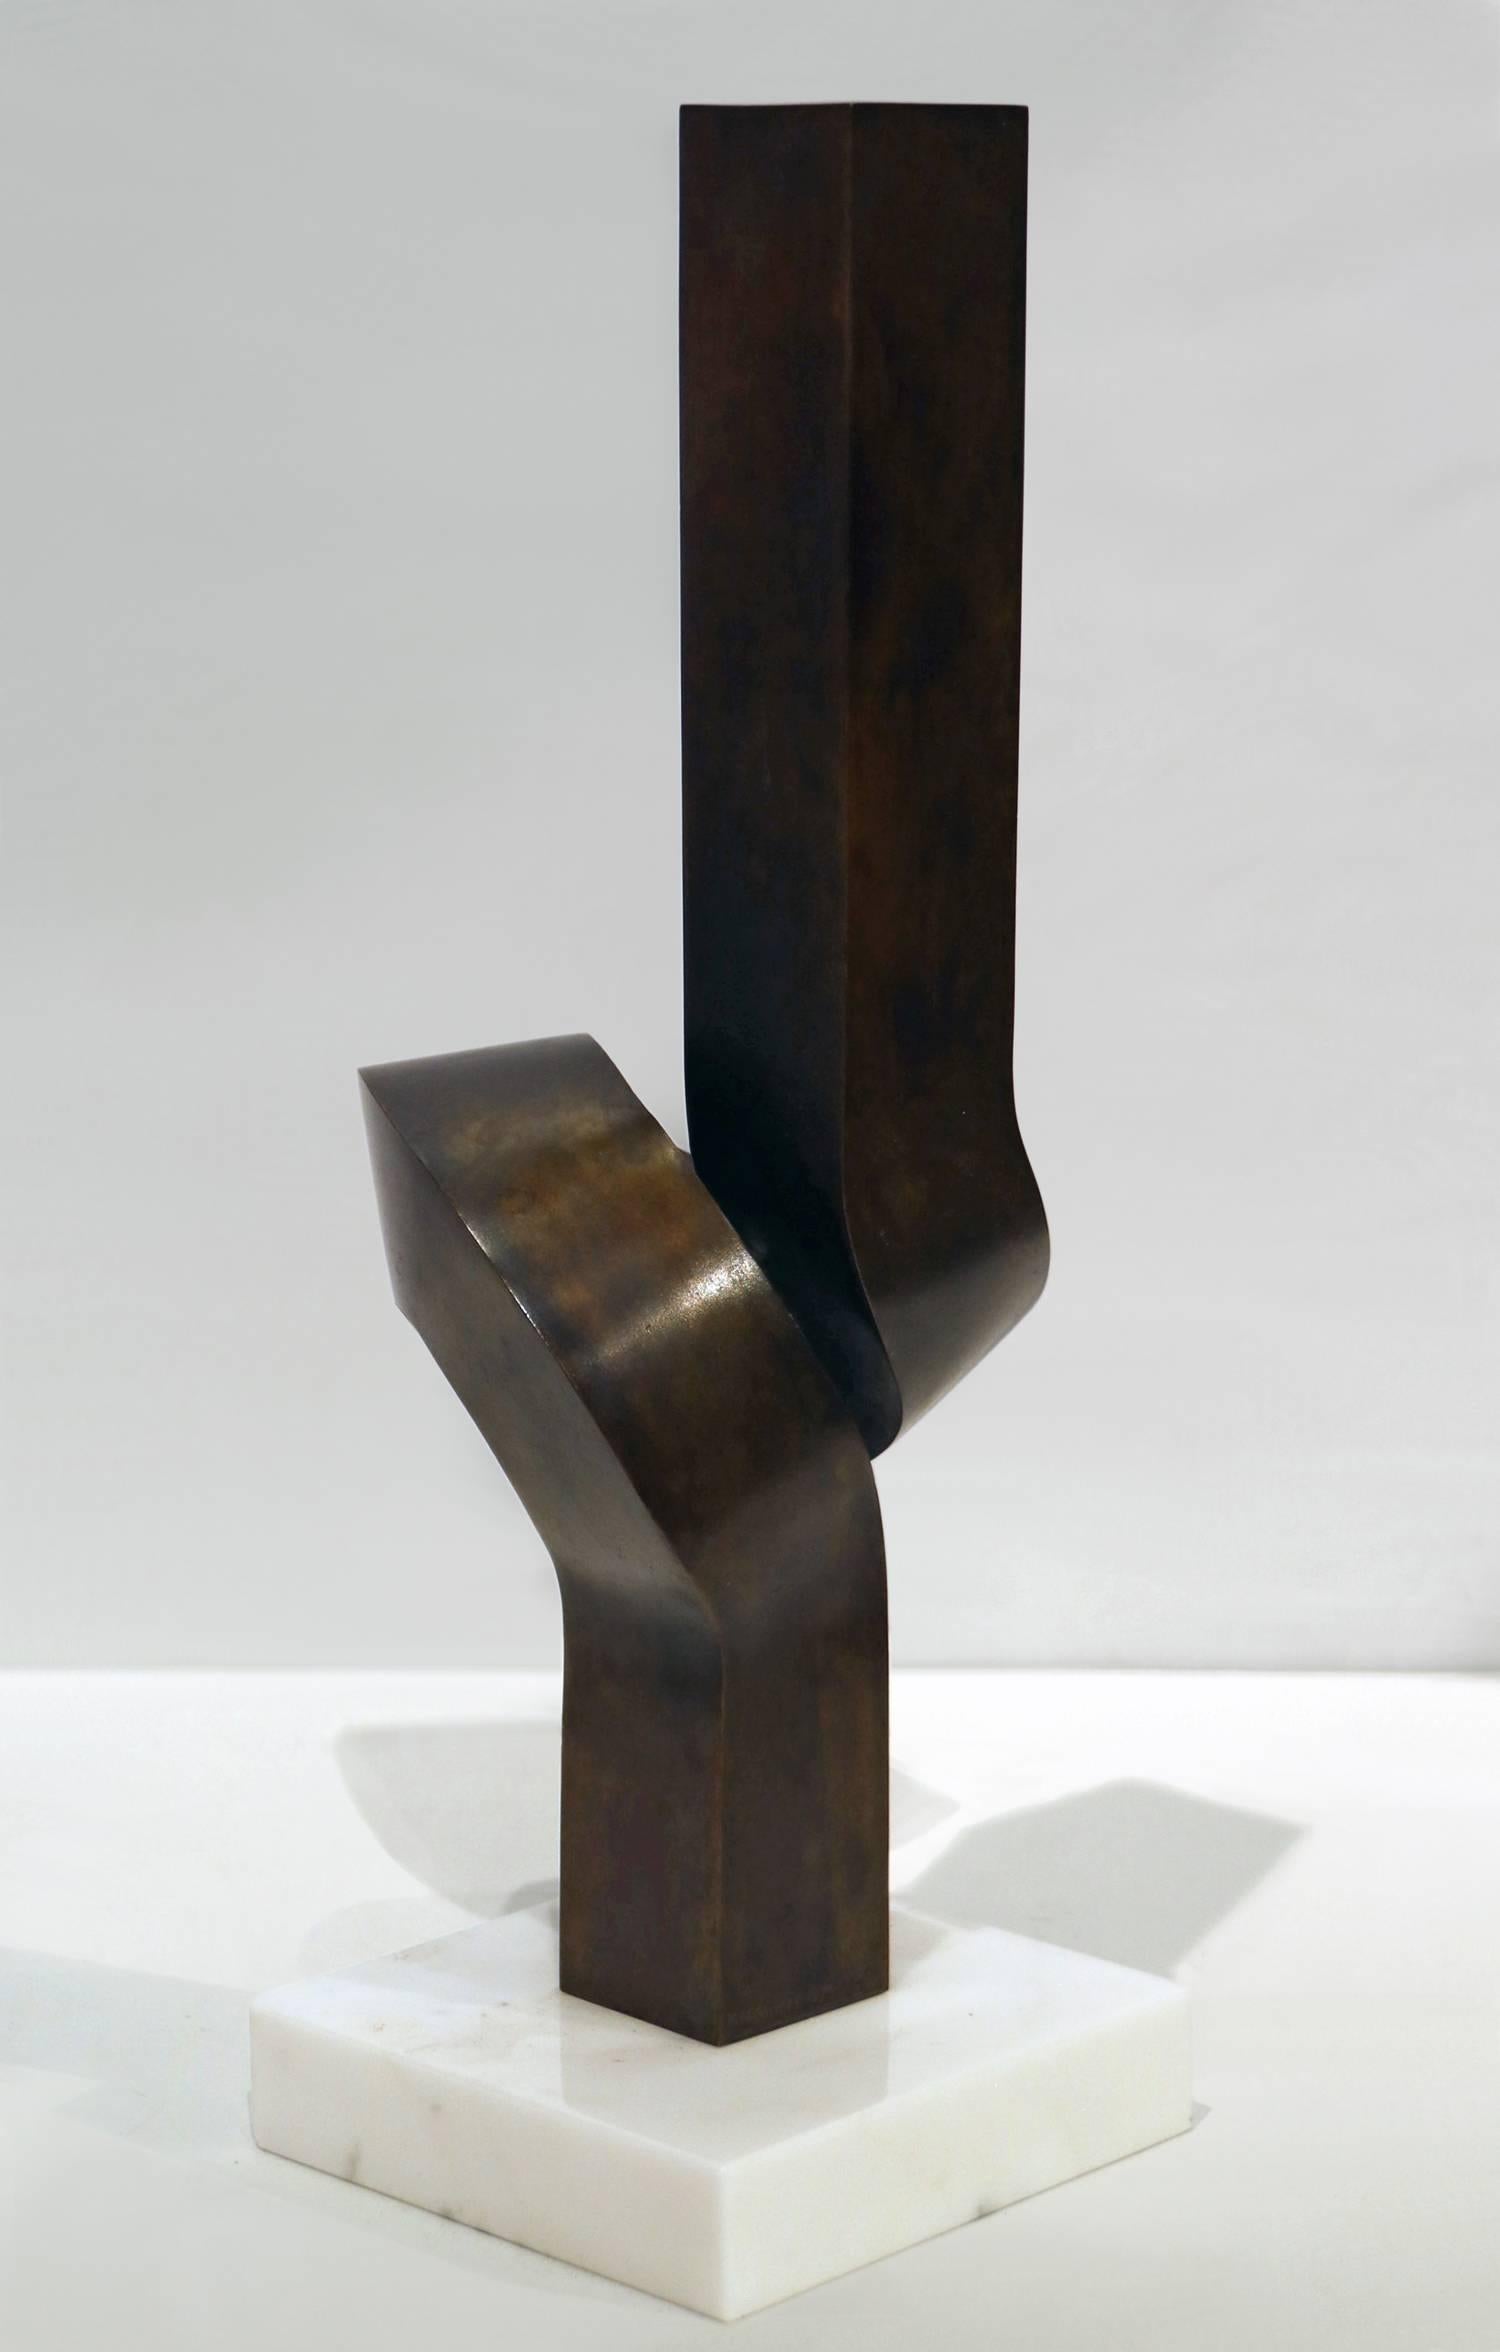 Meditation - Sculpture by Clement Meadmore